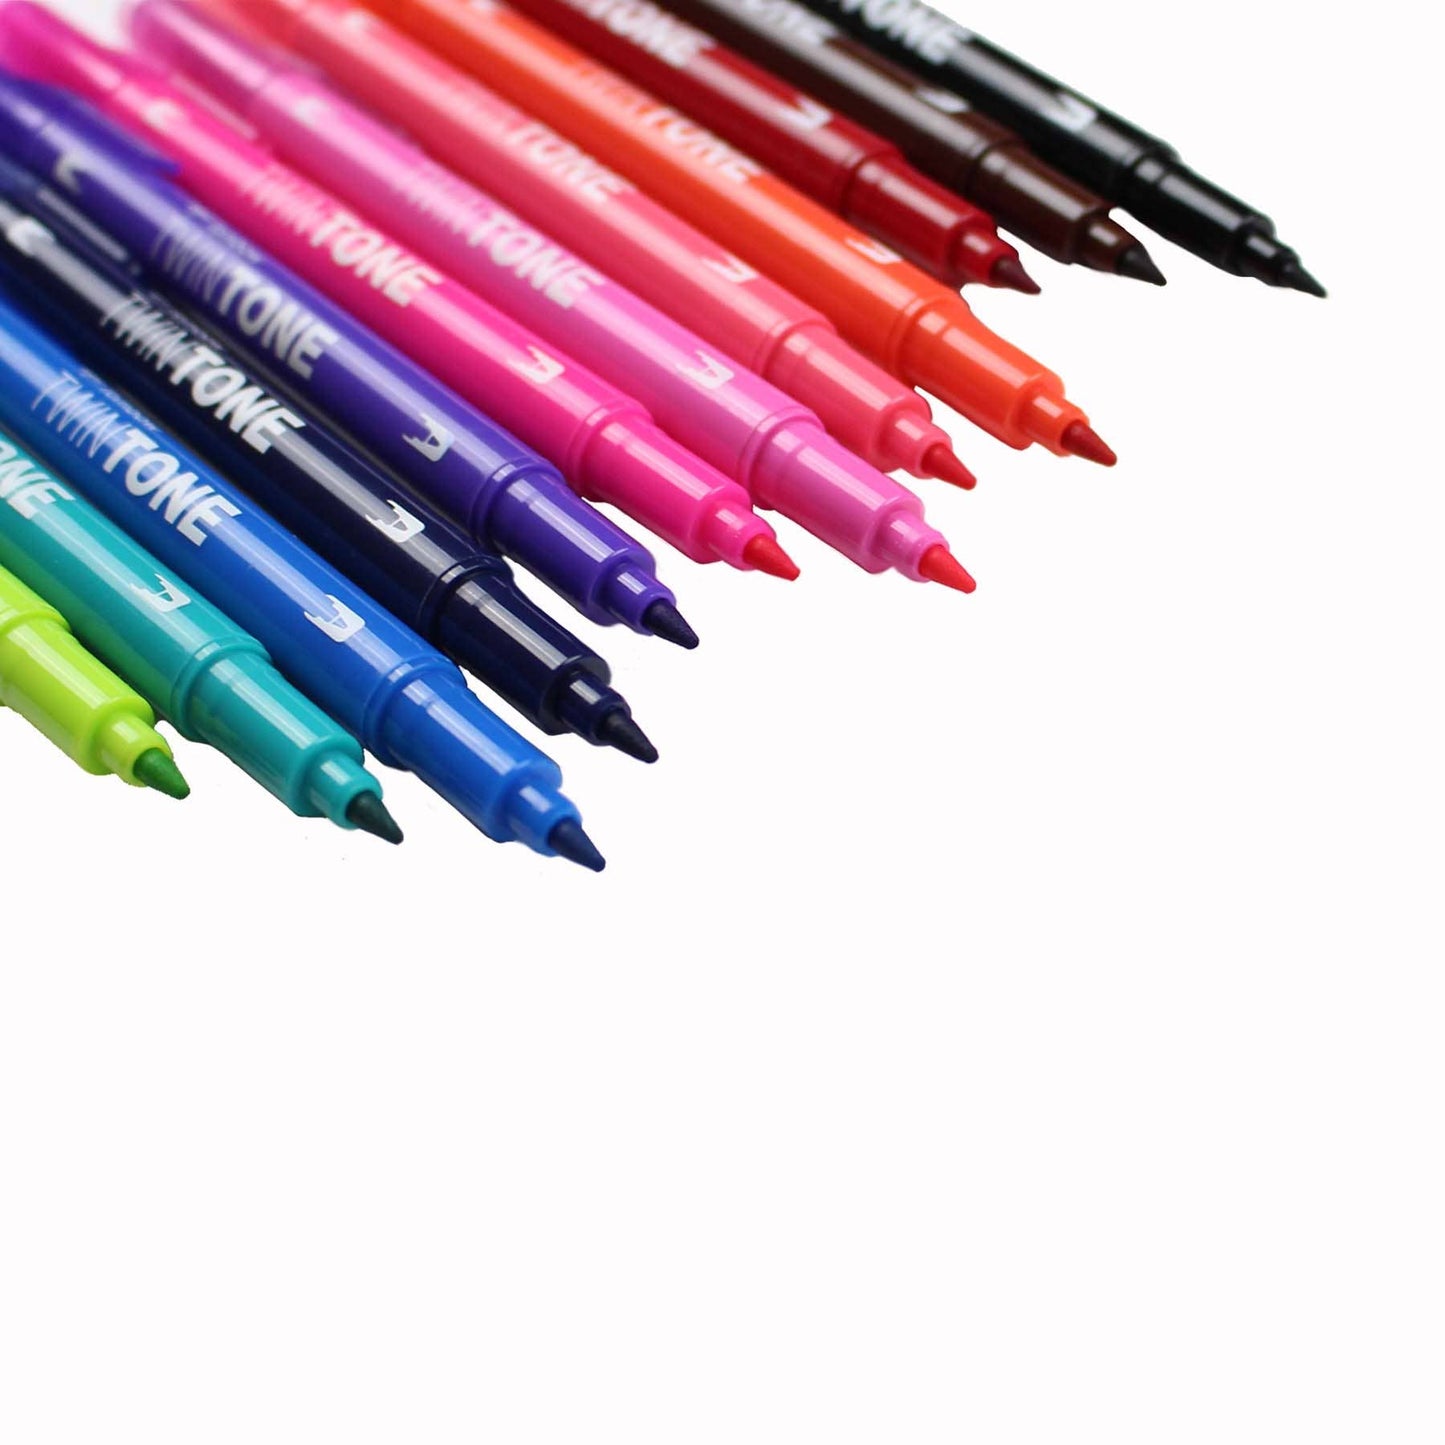 Tombow - TwinTone Marker Set: Bright - 12-Pack